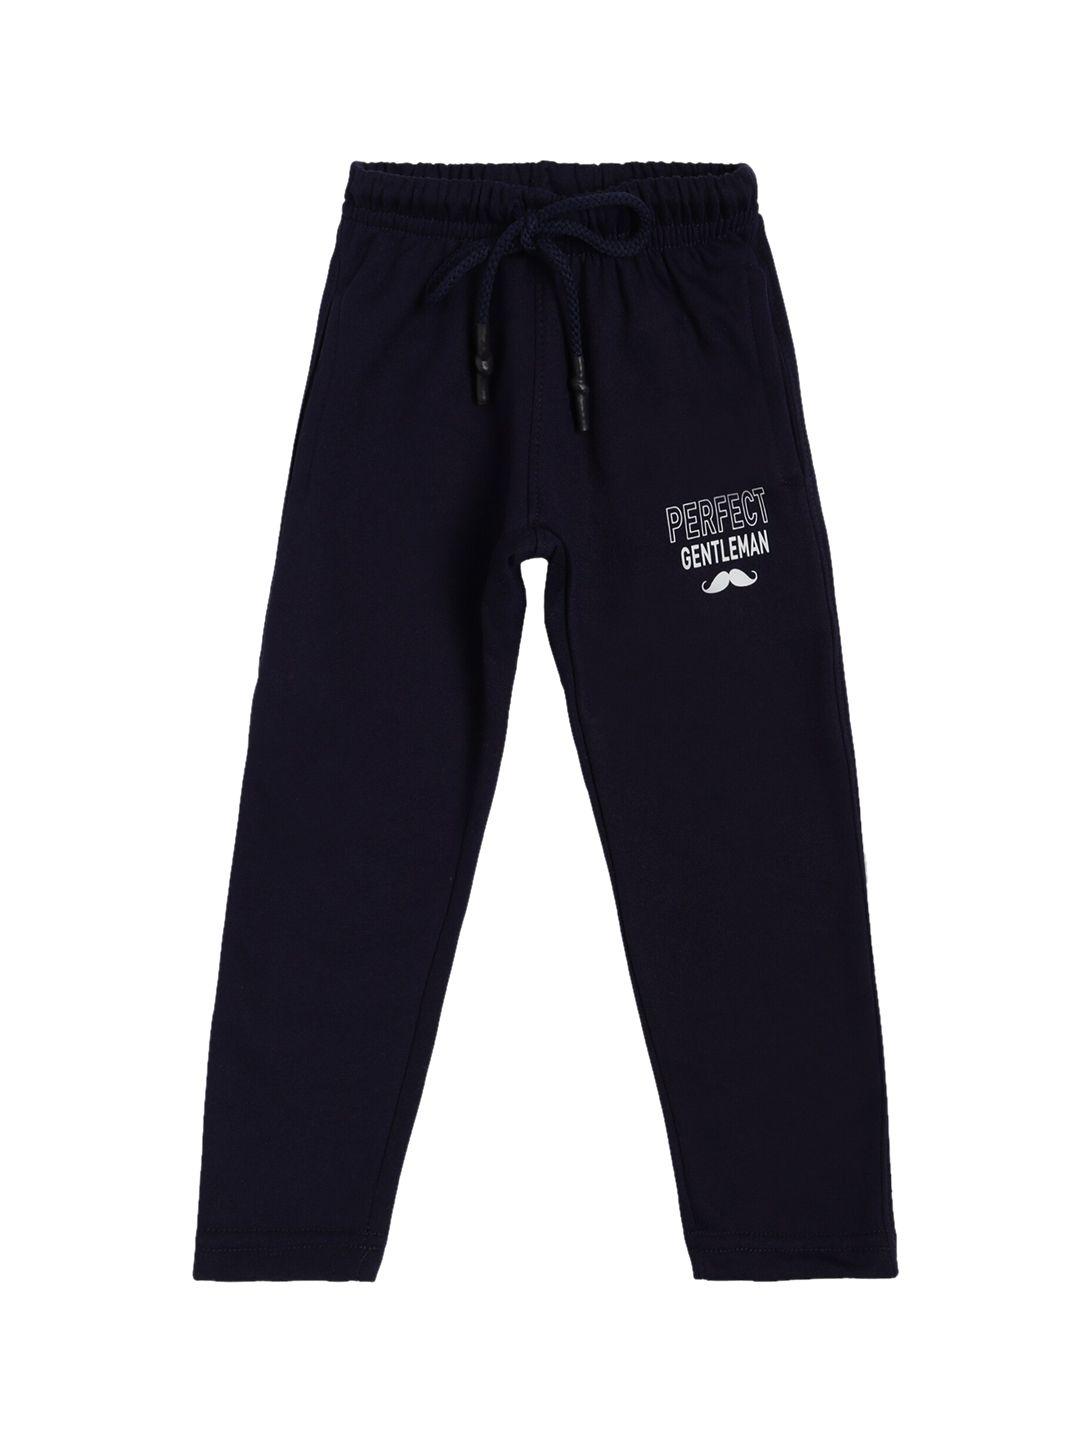 dyca boys navy blue solid track pant